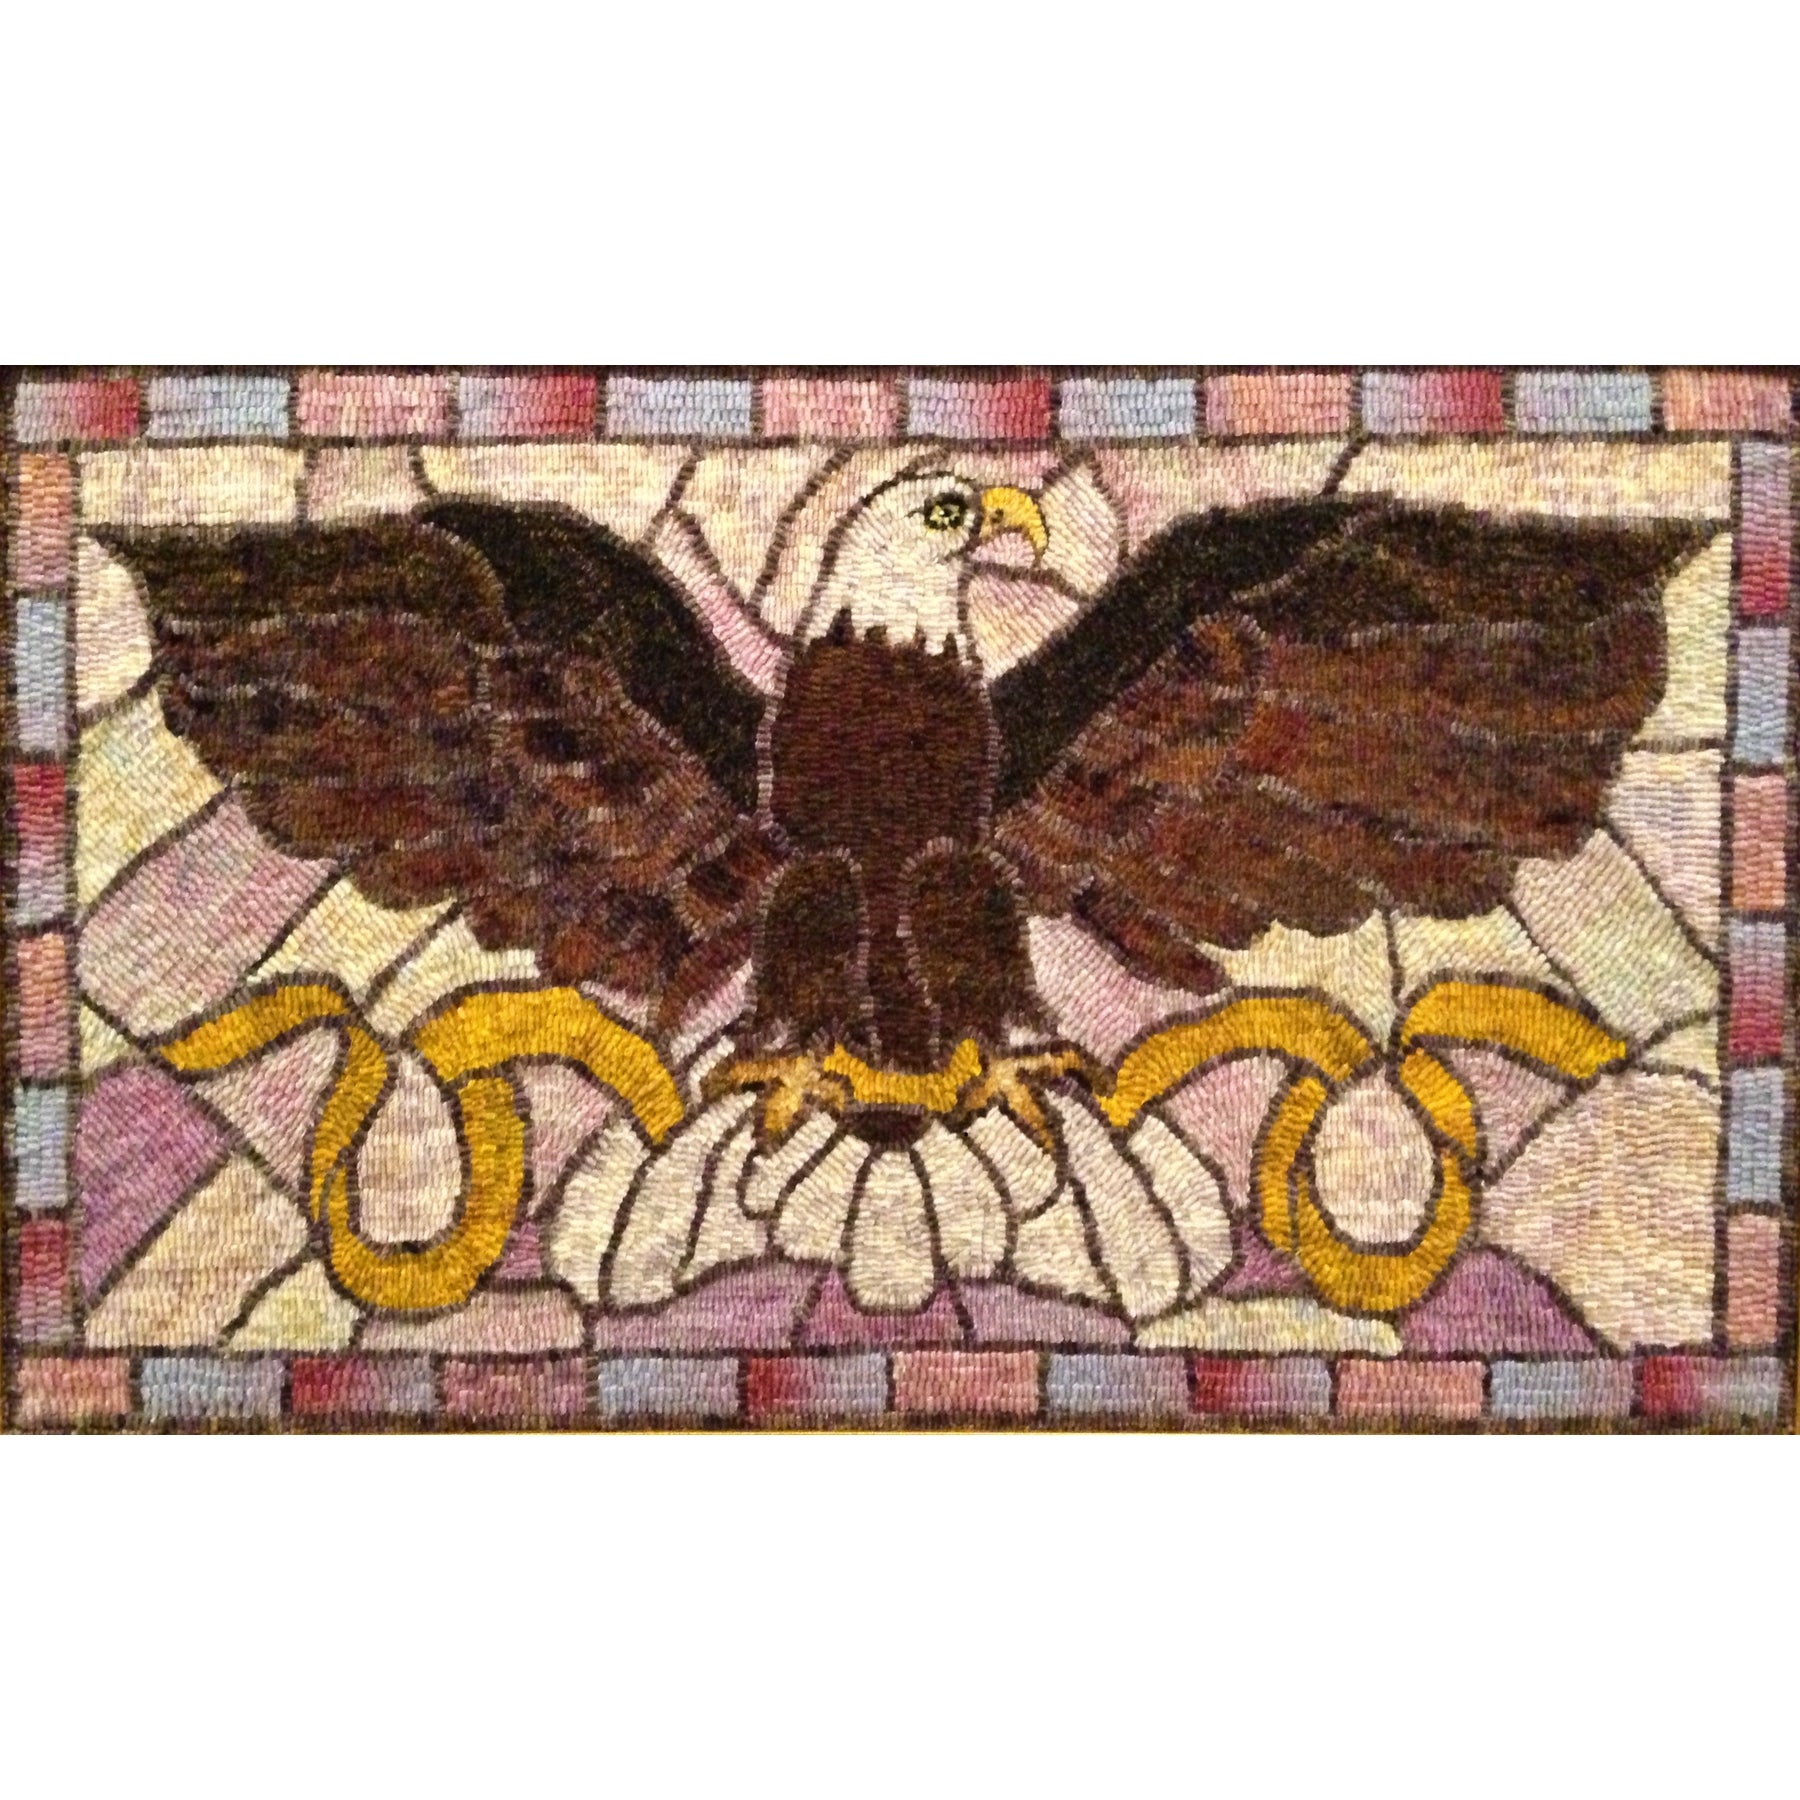 Stained Glass Eagle Bench, rug hooked by Diane DuBray